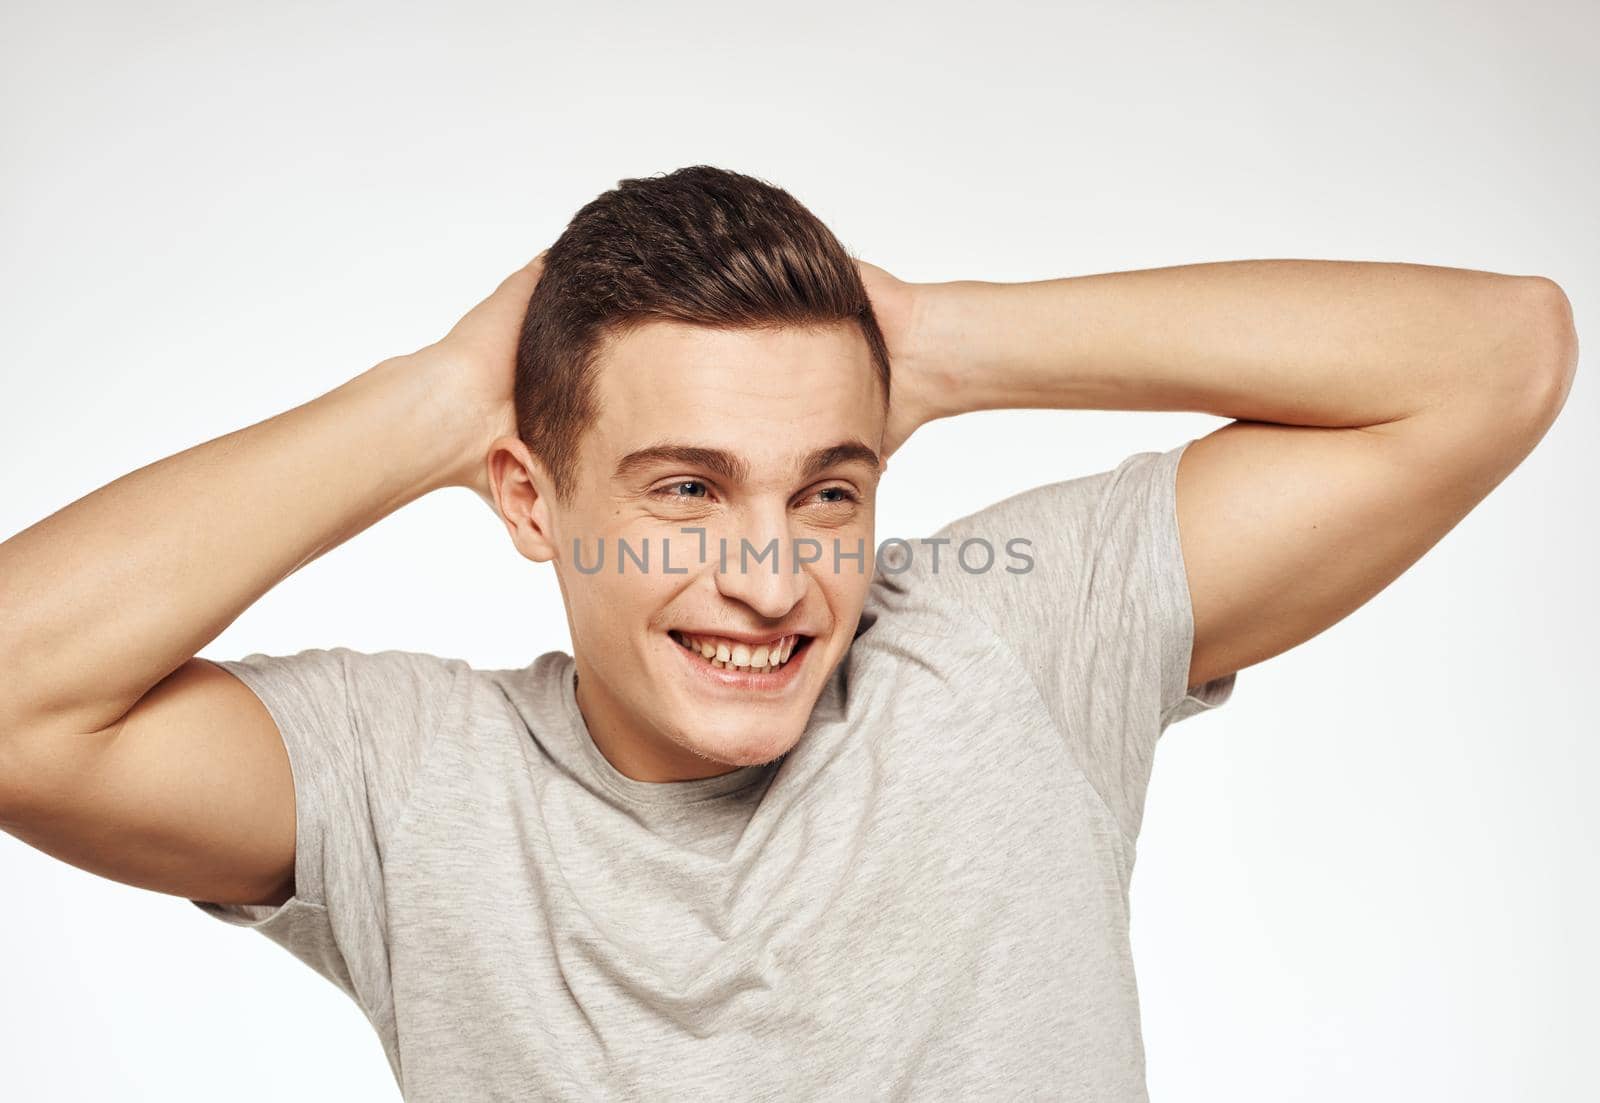 Cheerful man gesturing with his hands on a gray Studio T-shirt by SHOTPRIME